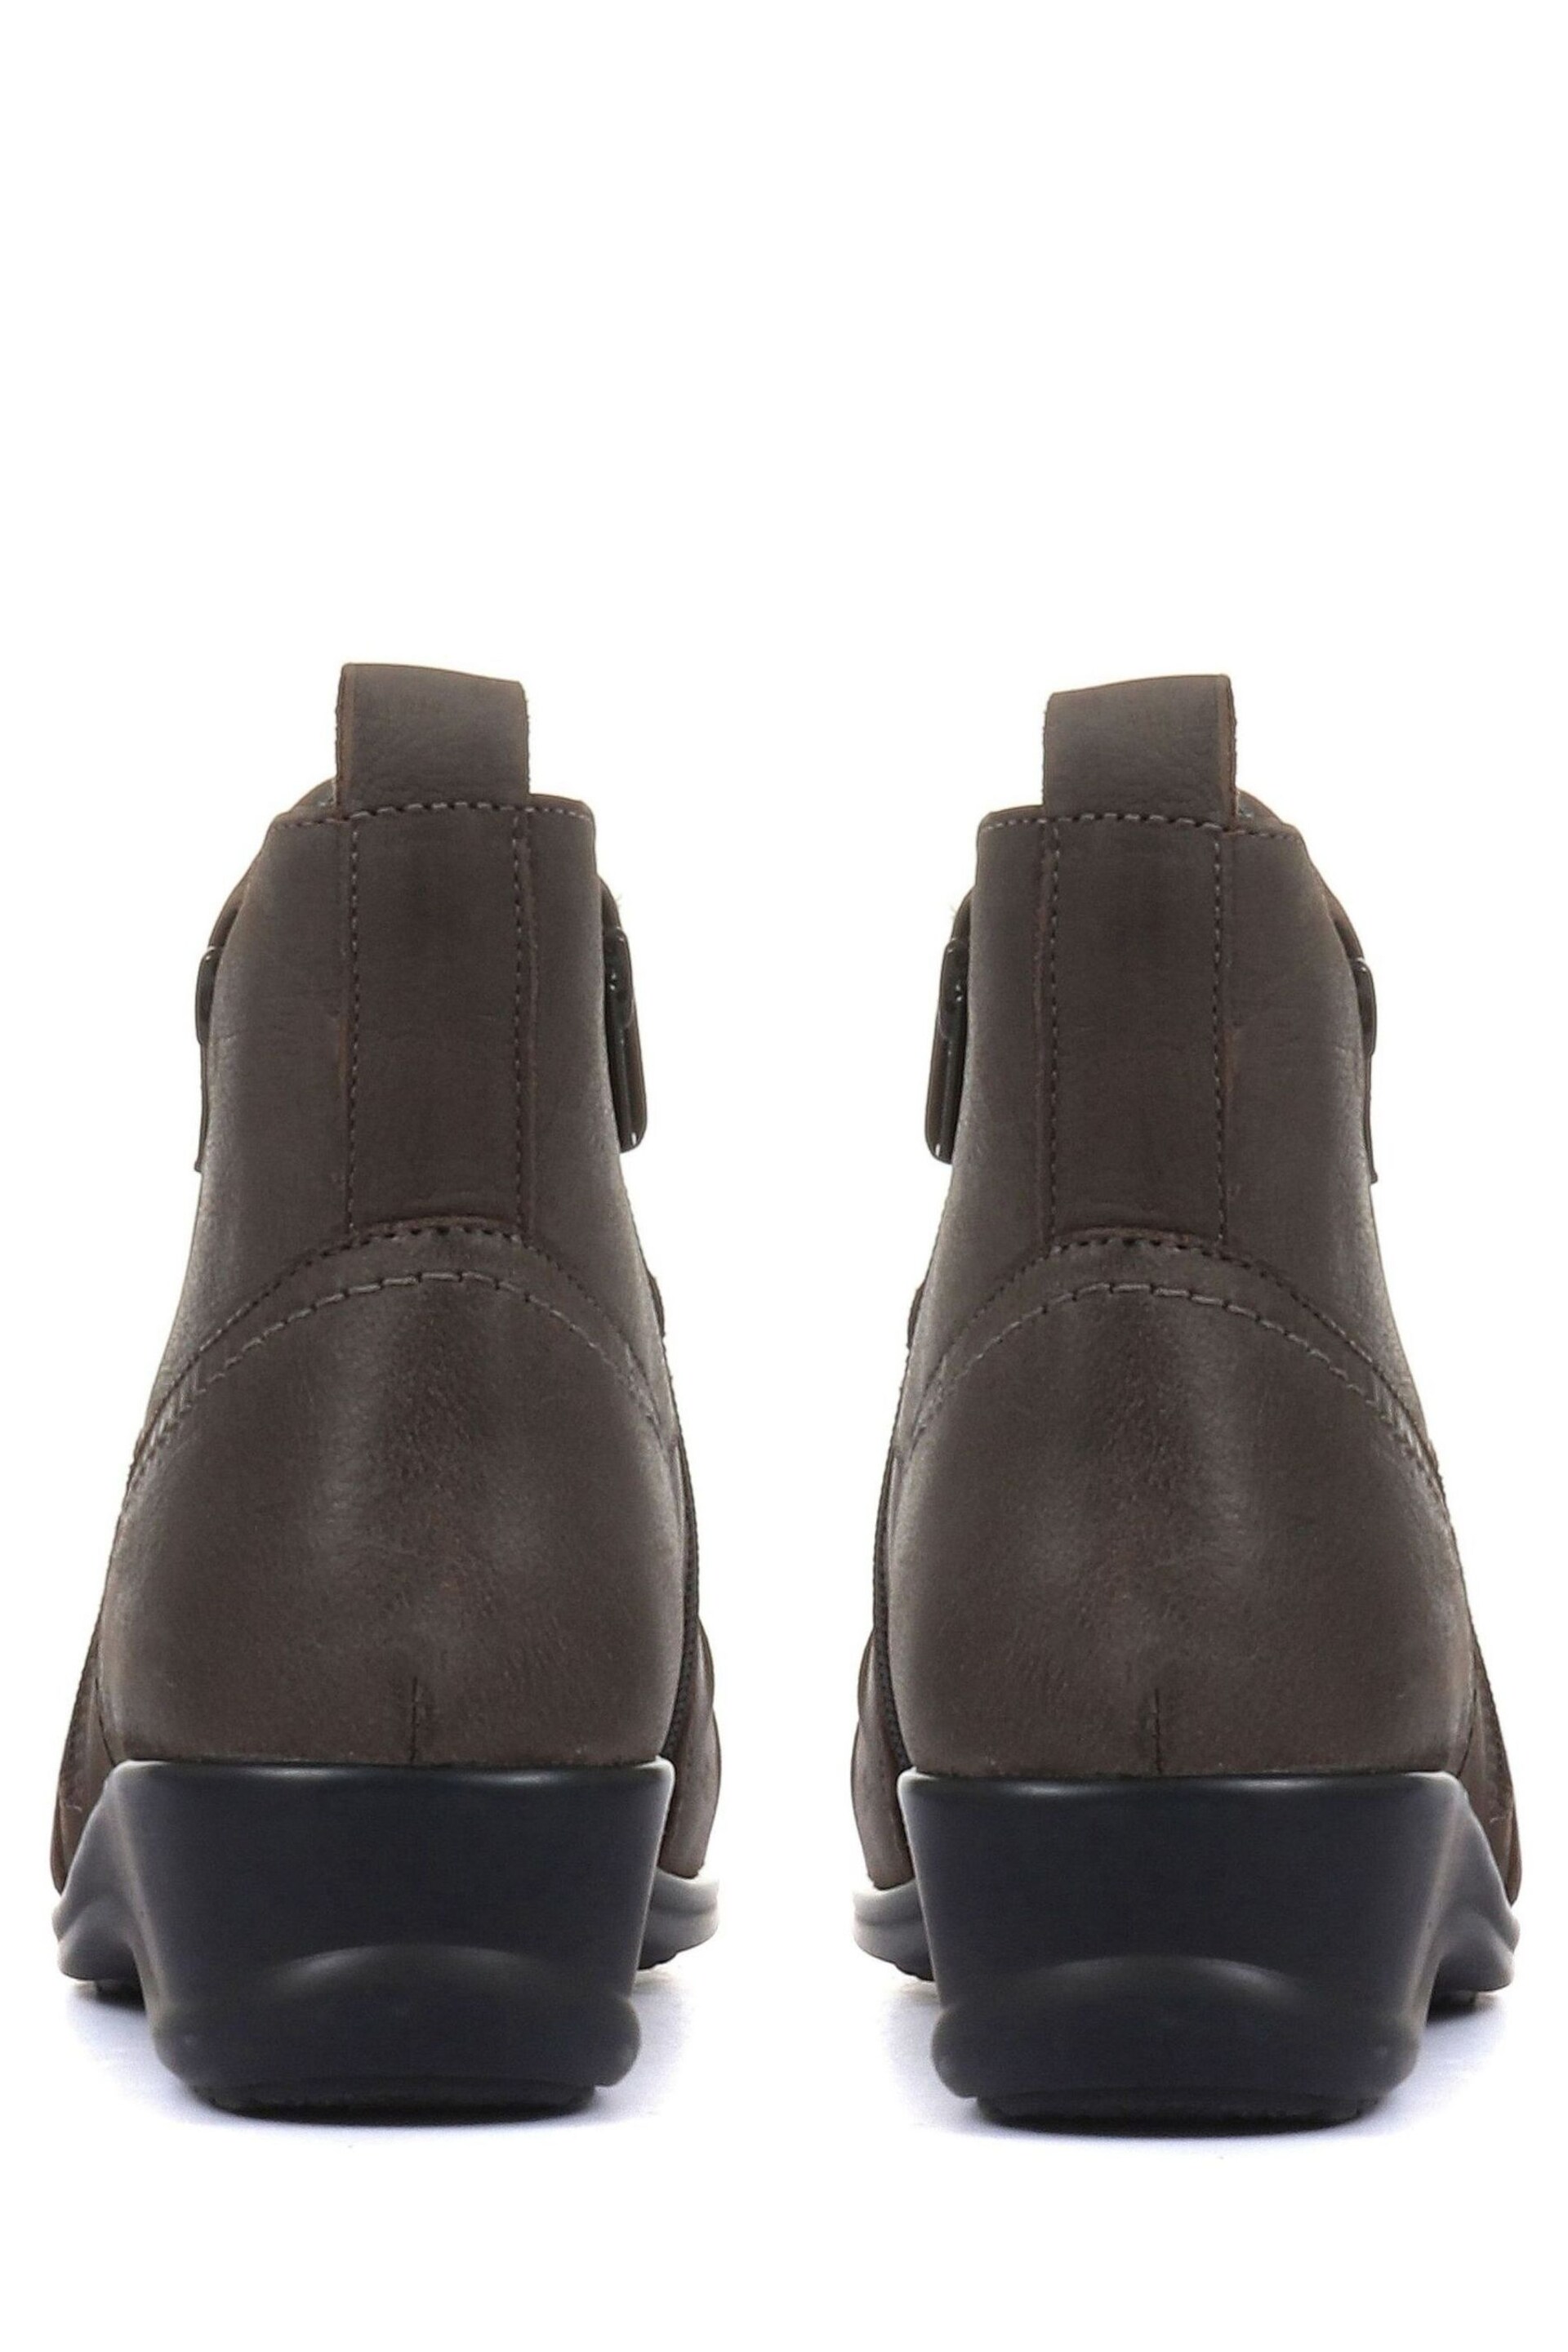 Pavers Grey Ladies Dual Zip Leather Ankle Boots - Image 3 of 5